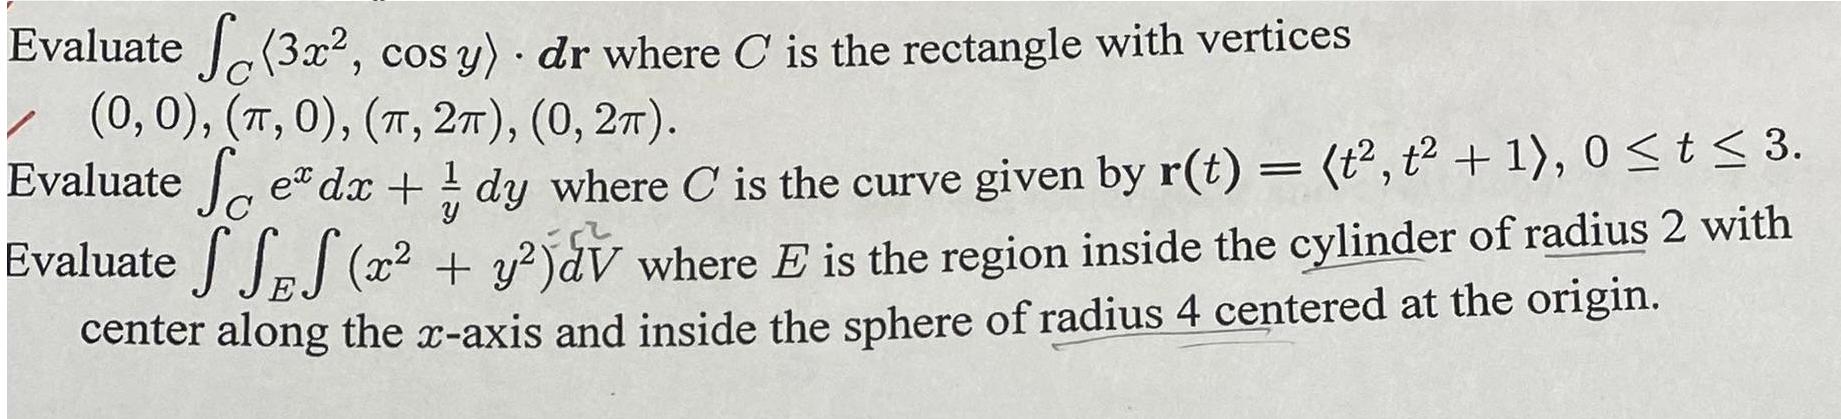 Evaluate (3x, cosy) dr where C is the rectangle with vertices  (0, 0), (, 0), (, 2), (0, 2). Evaluate fe dx +